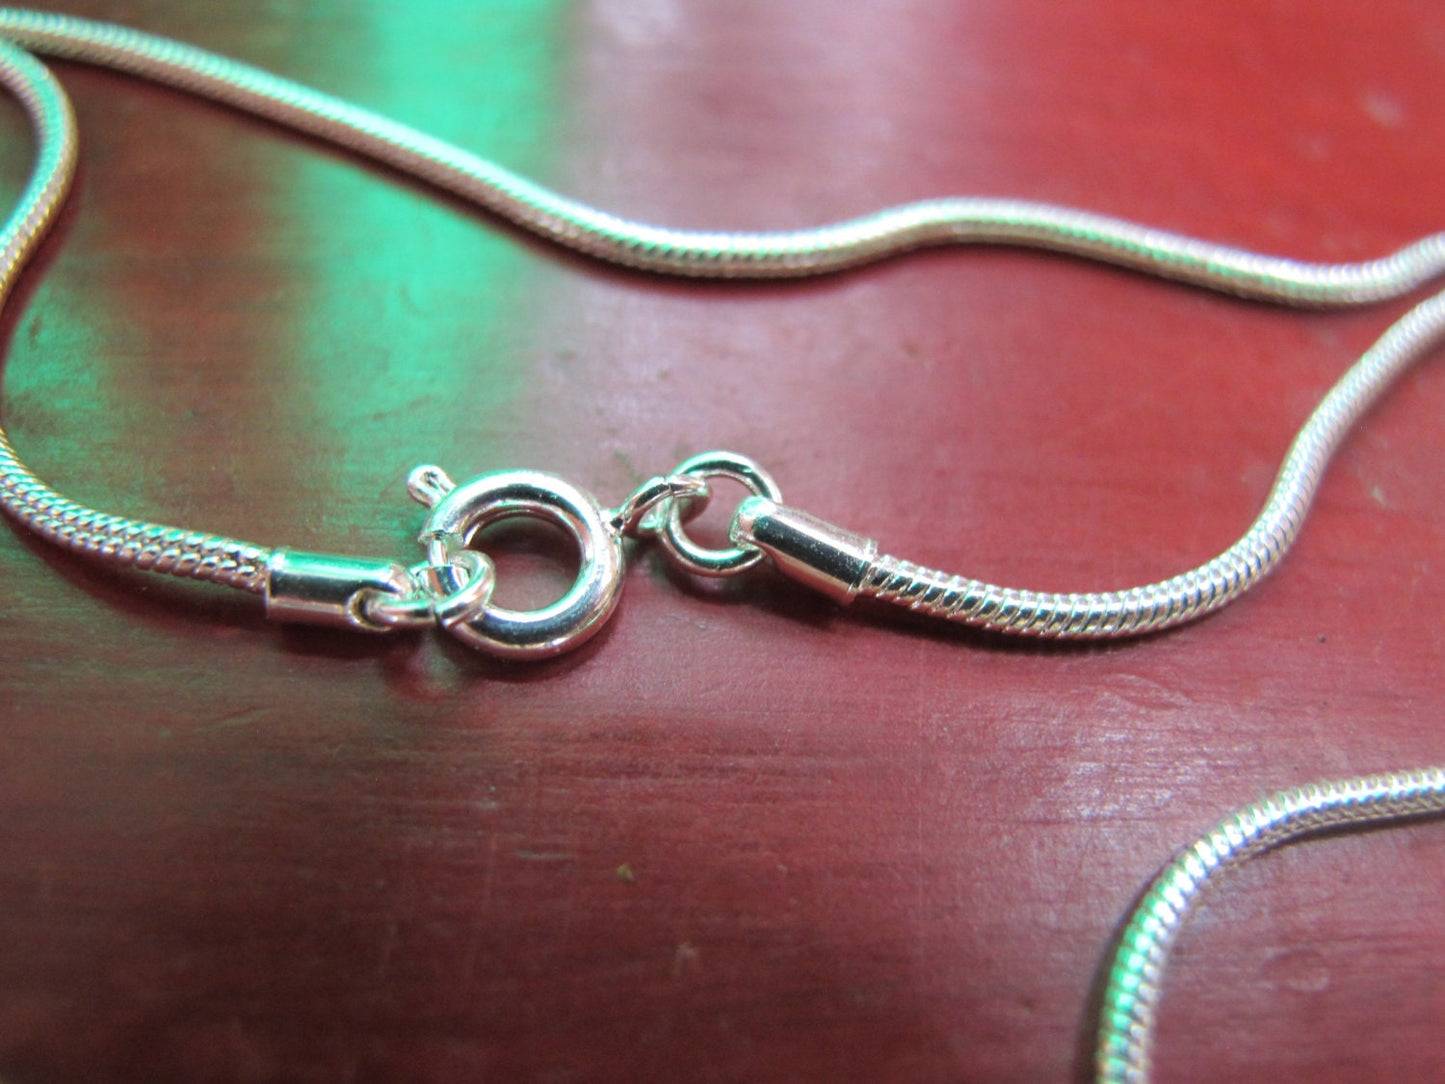 Sterling Plated Silver Snake Chain - 4 Lengths - Necklace - Pendant